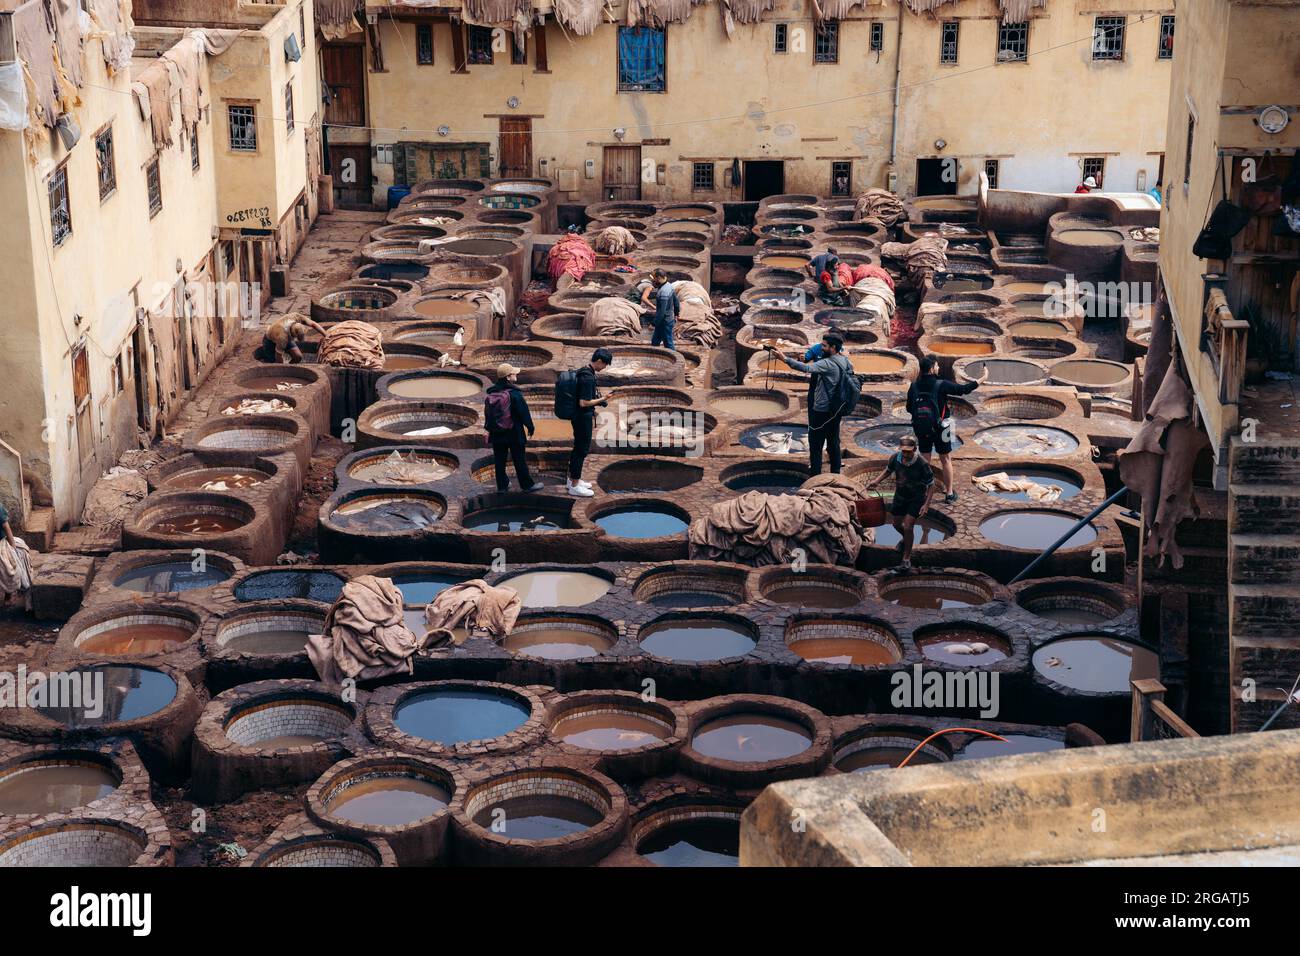 15.5.2023 Fes, Morocco: A famous Chouara tannery in Fes, Morocco, showcasing the ancient art of leather dyeing using natural techniques and vibrant Stock Photo